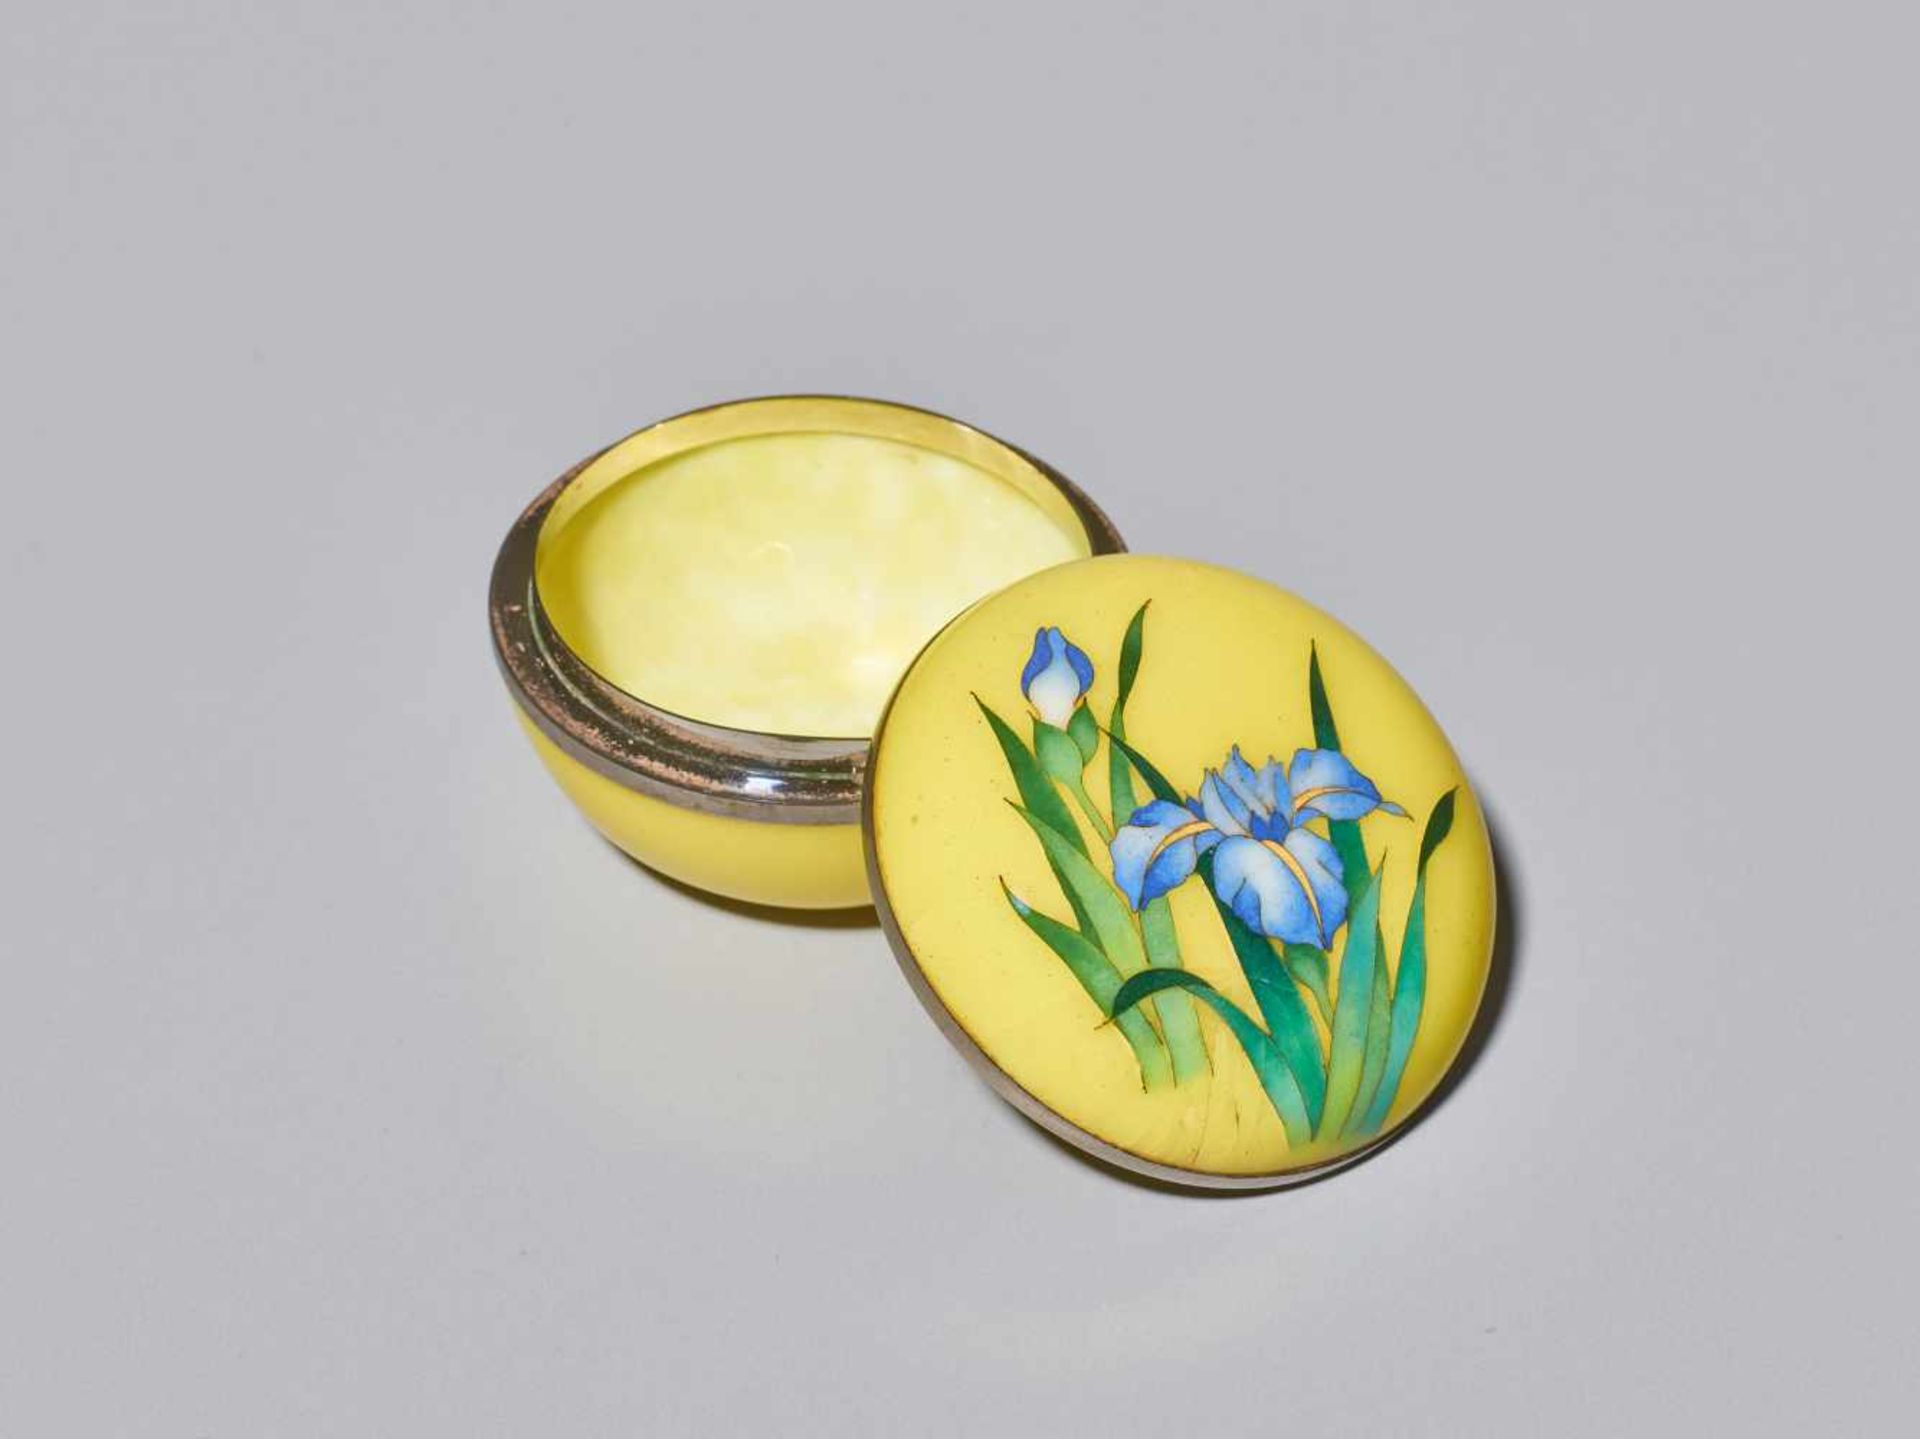 A JAPANESE CLOISONNÉ ENAMEL CIRCULAR BOX AND COVER WITH IRIS BLOSSOMS Cloisonné with colored - Image 2 of 6